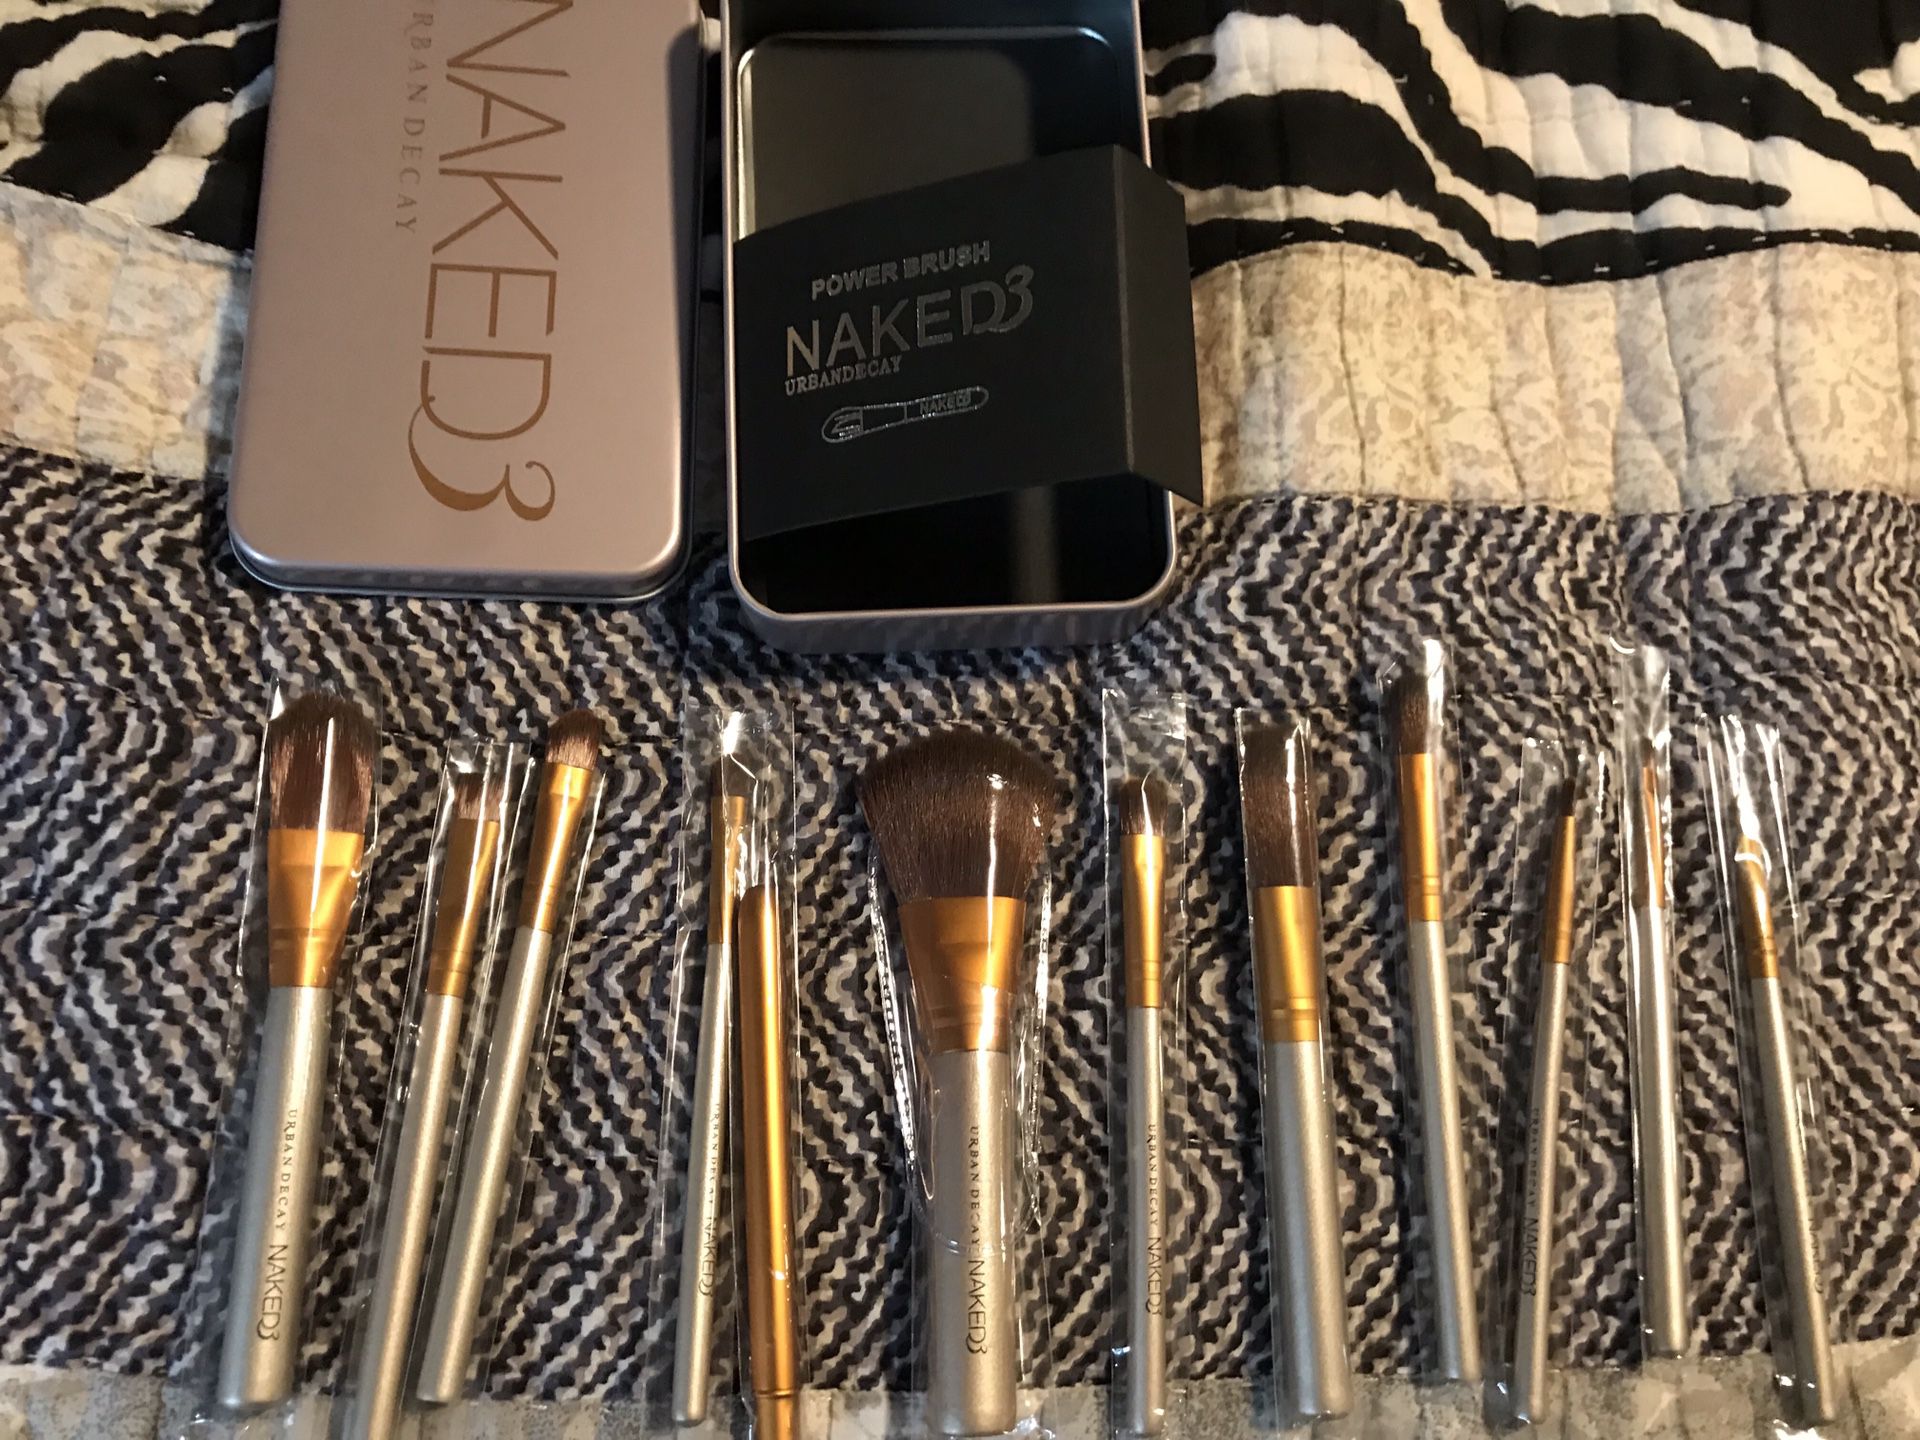 Makeup Brush Set - 12 pieces with container to hold them - $15 Firm